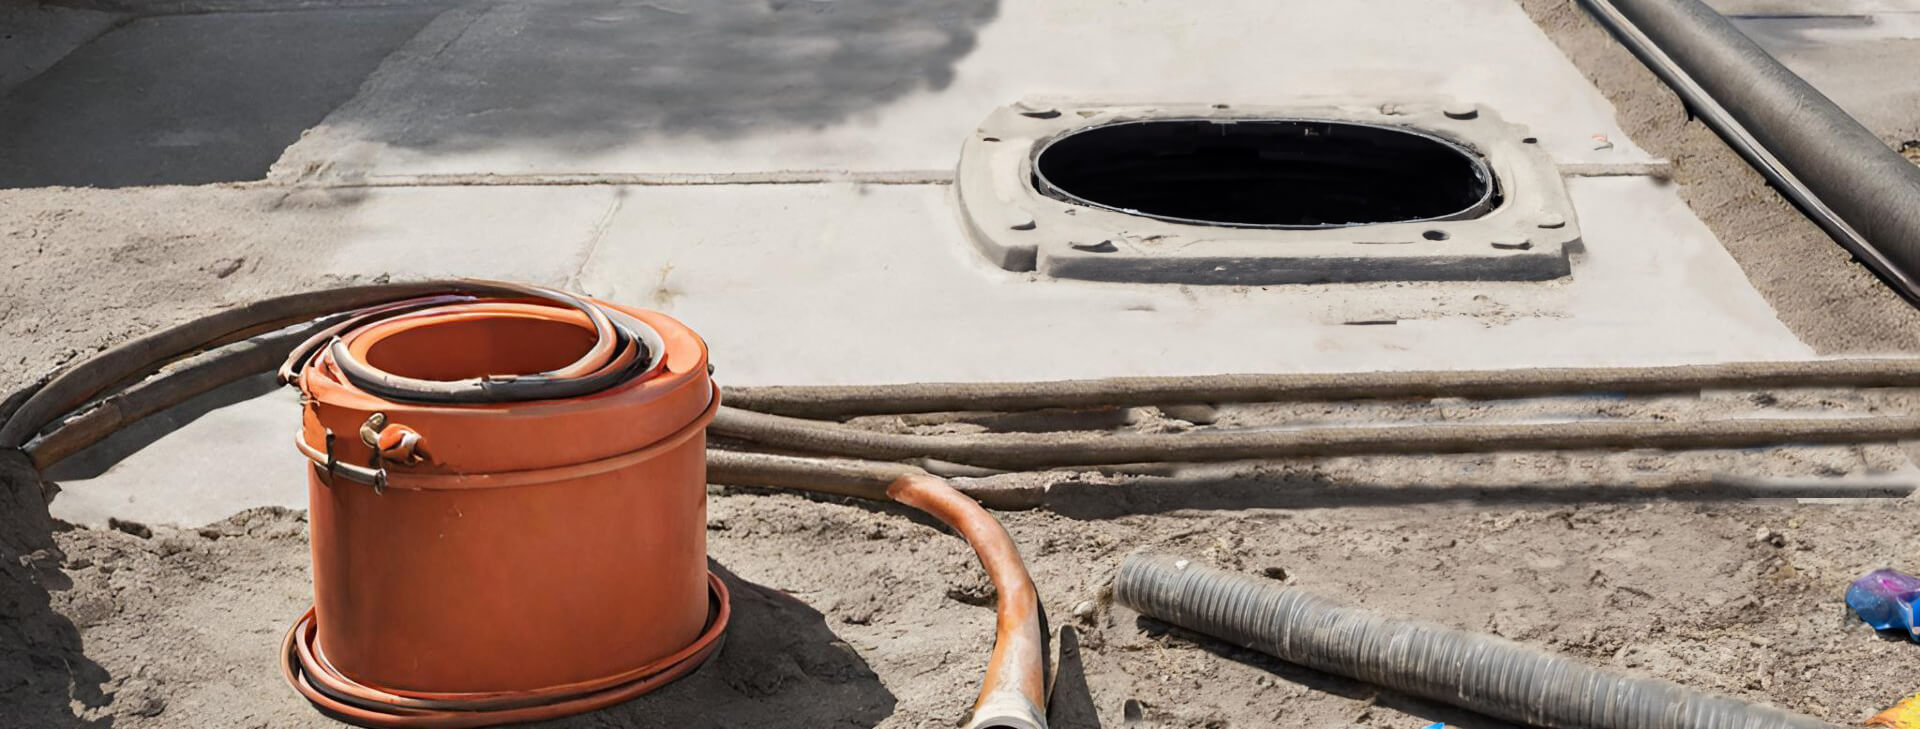 Discover the difference and benefits of trenchless sewer line repair vs traditional sewer line repair in our blog!